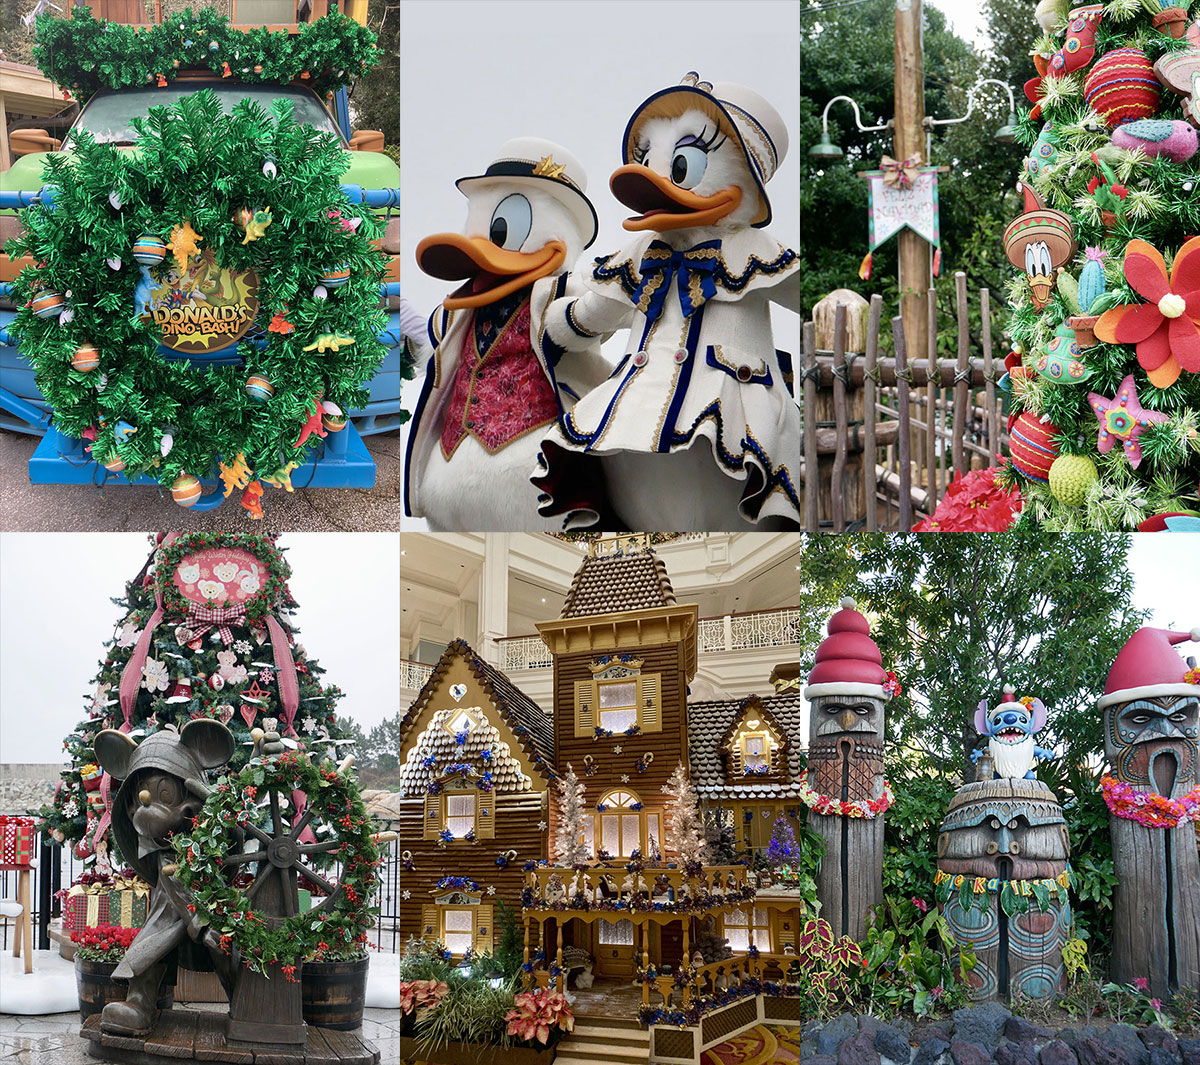 The Disney Parks at Christmas